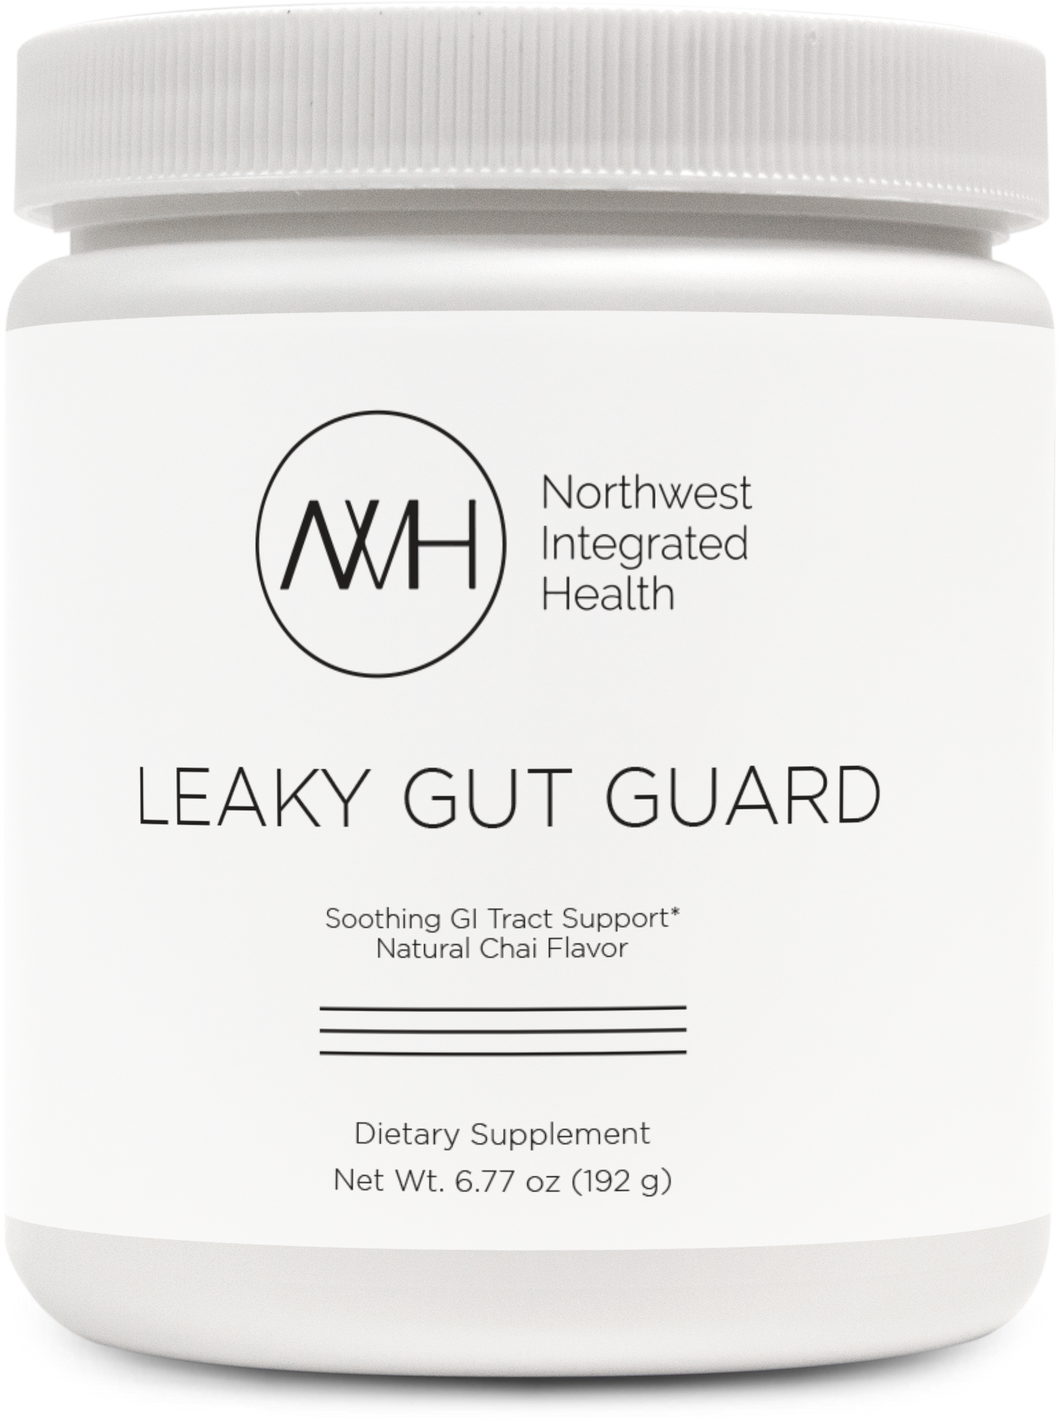 LEAKY GUT GUARD